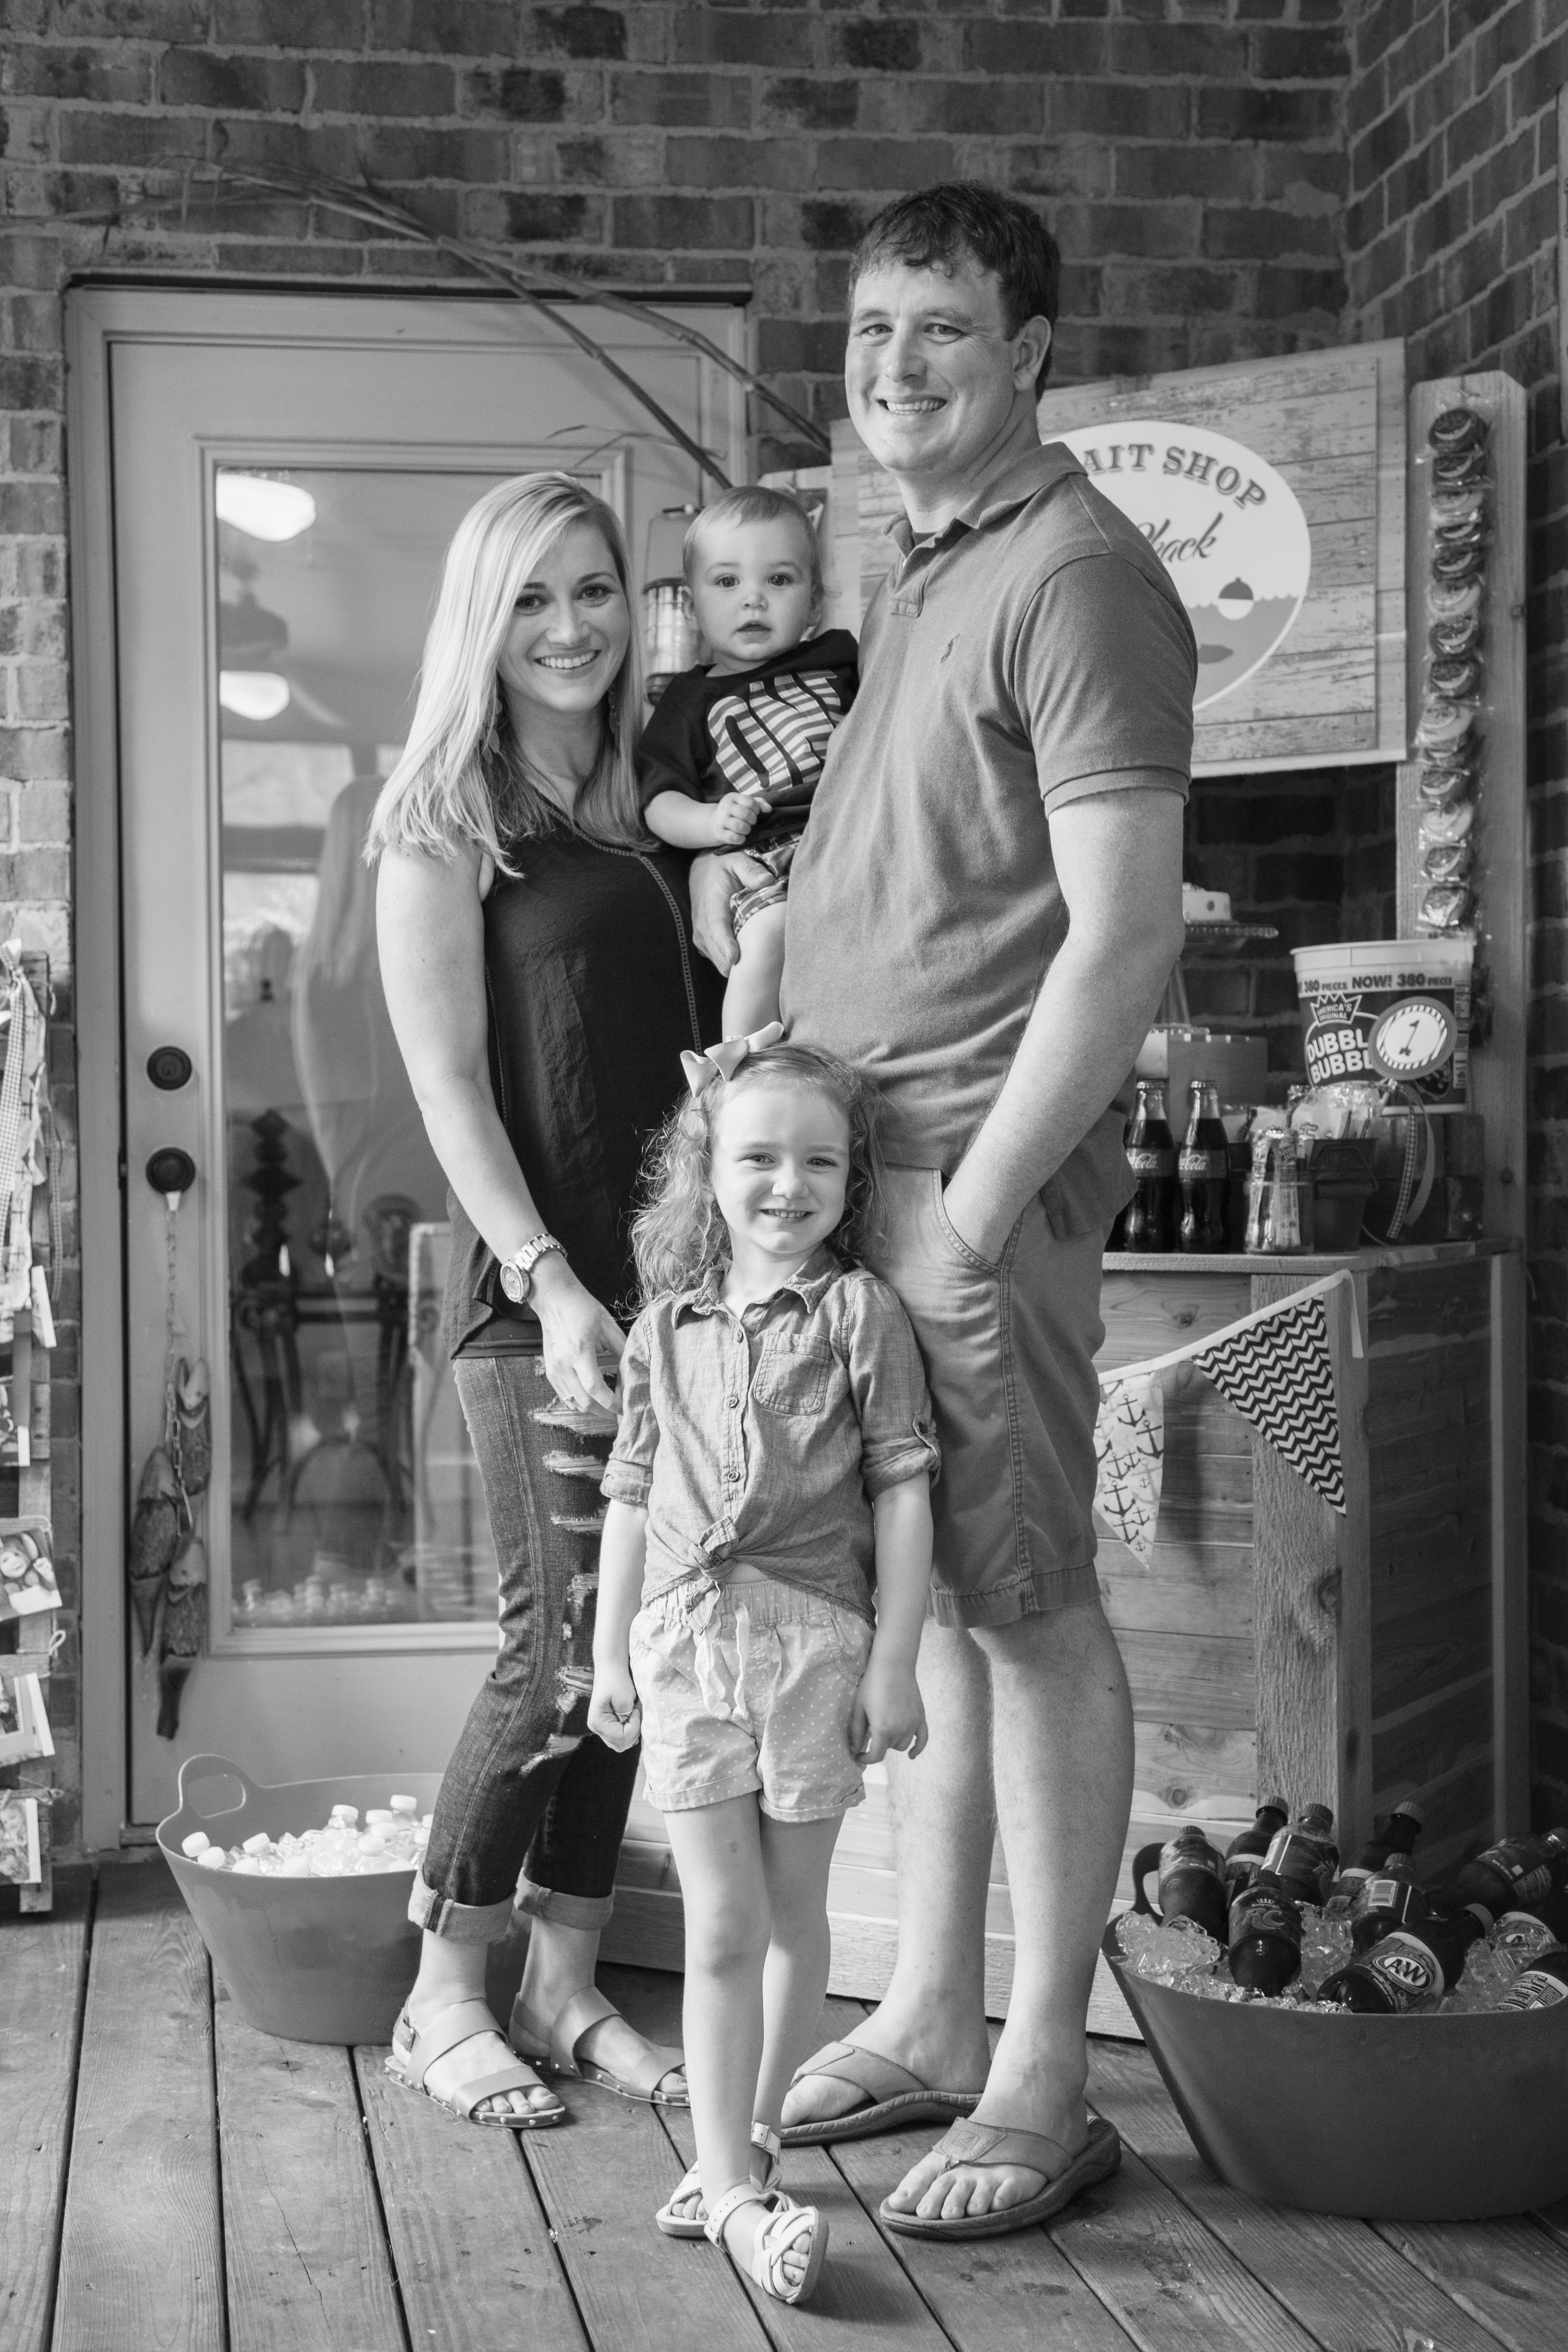 Judson's Bait Shop, a first birthday celebration - Life in the